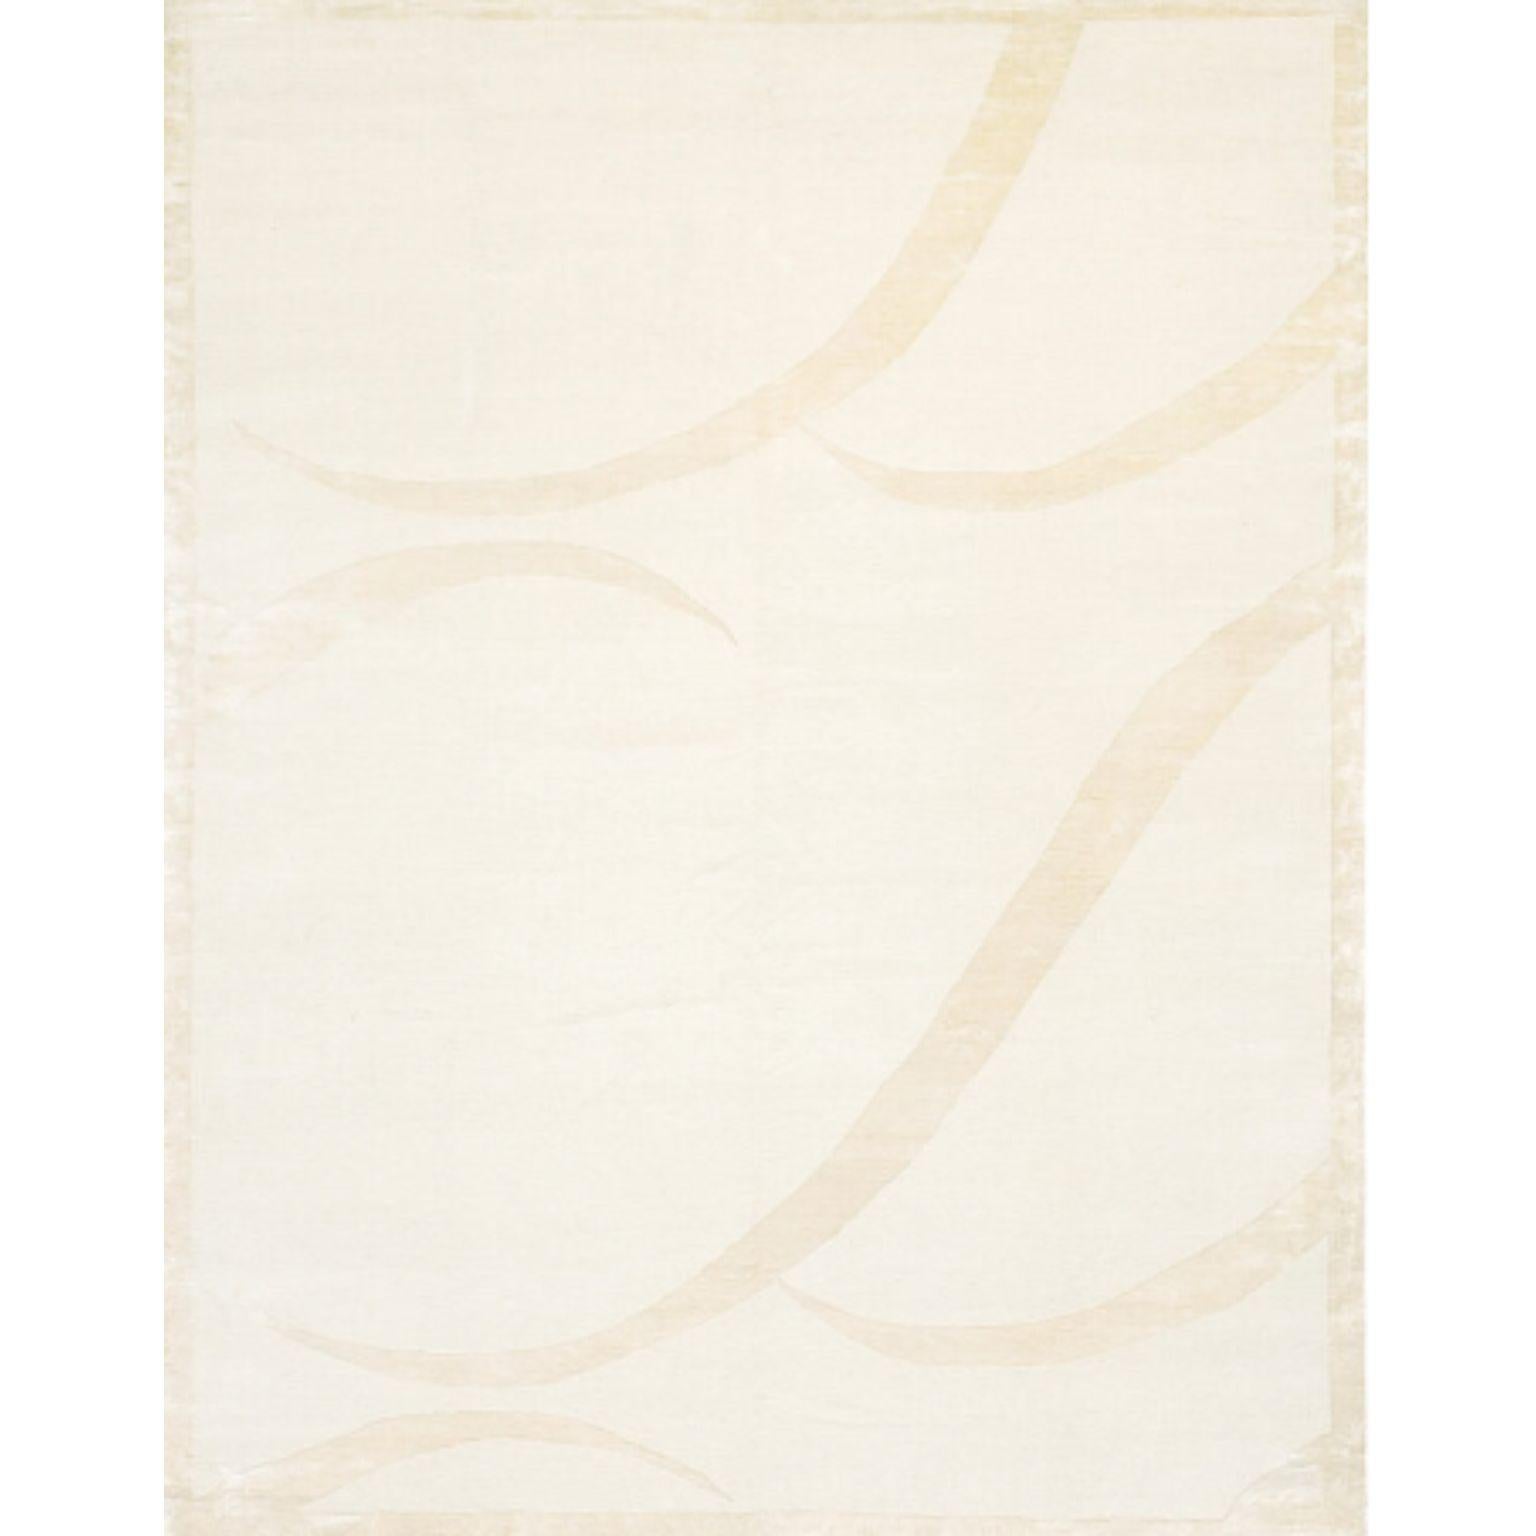 DIS 200 rug by Illulian
Dimensions: D 300 x H 200 cm 
Materials: Wool 80%, silk 20%
Variations available and prices may vary according to materials and sizes.

Illulian, historic and prestigious rug company brand, internationally renowned in